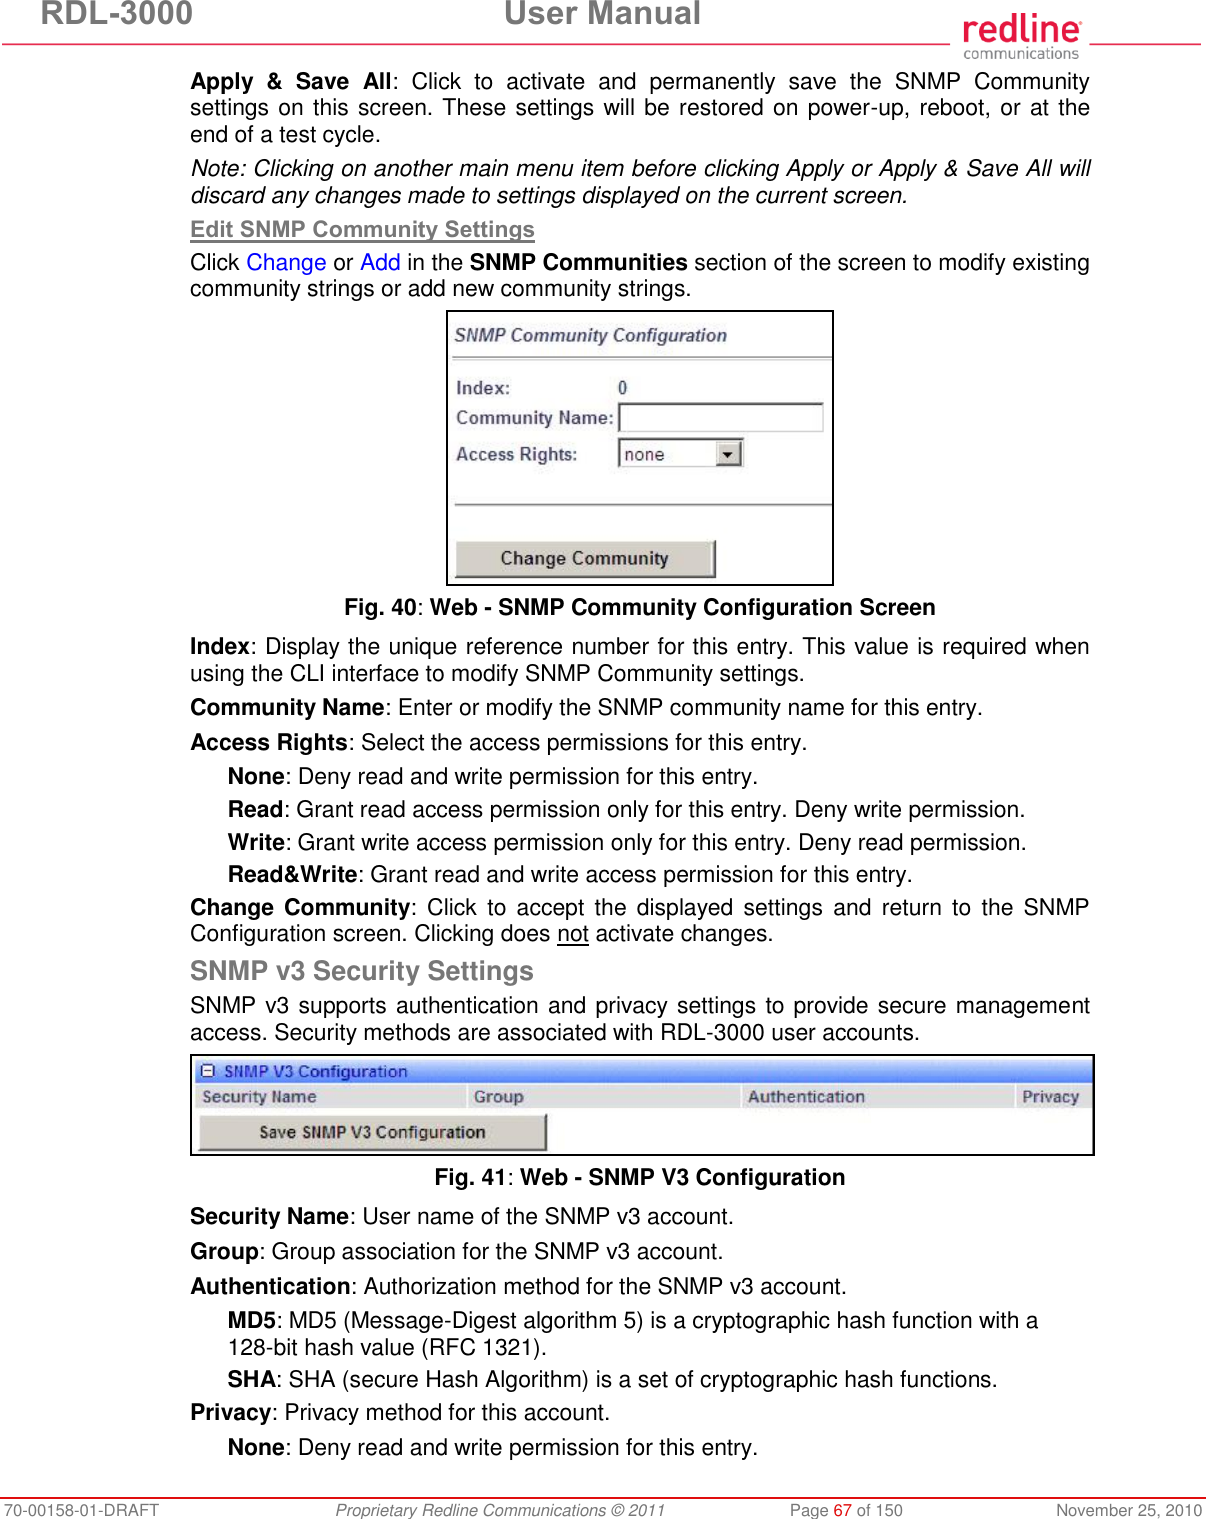 RDL-3000  User Manual 70-00158-01-DRAFT  Proprietary Redline Communications © 2011  Page 67 of 150  November 25, 2010 Apply  &amp;  Save  All:  Click  to  activate  and  permanently  save  the  SNMP  Community settings on this screen. These settings will be restored on power-up, reboot, or at the end of a test cycle. Note: Clicking on another main menu item before clicking Apply or Apply &amp; Save All will discard any changes made to settings displayed on the current screen. Edit SNMP Community Settings Click Change or Add in the SNMP Communities section of the screen to modify existing community strings or add new community strings.  Fig. 40: Web - SNMP Community Configuration Screen Index: Display the unique reference number for this entry. This value is required when using the CLI interface to modify SNMP Community settings. Community Name: Enter or modify the SNMP community name for this entry. Access Rights: Select the access permissions for this entry. None: Deny read and write permission for this entry. Read: Grant read access permission only for this entry. Deny write permission. Write: Grant write access permission only for this entry. Deny read permission. Read&amp;Write: Grant read and write access permission for this entry. Change Community:  Click  to  accept  the  displayed  settings  and  return to  the  SNMP Configuration screen. Clicking does not activate changes. SNMP v3 Security Settings SNMP v3 supports authentication and privacy settings to provide secure management access. Security methods are associated with RDL-3000 user accounts.  Fig. 41: Web - SNMP V3 Configuration Security Name: User name of the SNMP v3 account. Group: Group association for the SNMP v3 account. Authentication: Authorization method for the SNMP v3 account. MD5: MD5 (Message-Digest algorithm 5) is a cryptographic hash function with a 128-bit hash value (RFC 1321). SHA: SHA (secure Hash Algorithm) is a set of cryptographic hash functions. Privacy: Privacy method for this account. None: Deny read and write permission for this entry. 